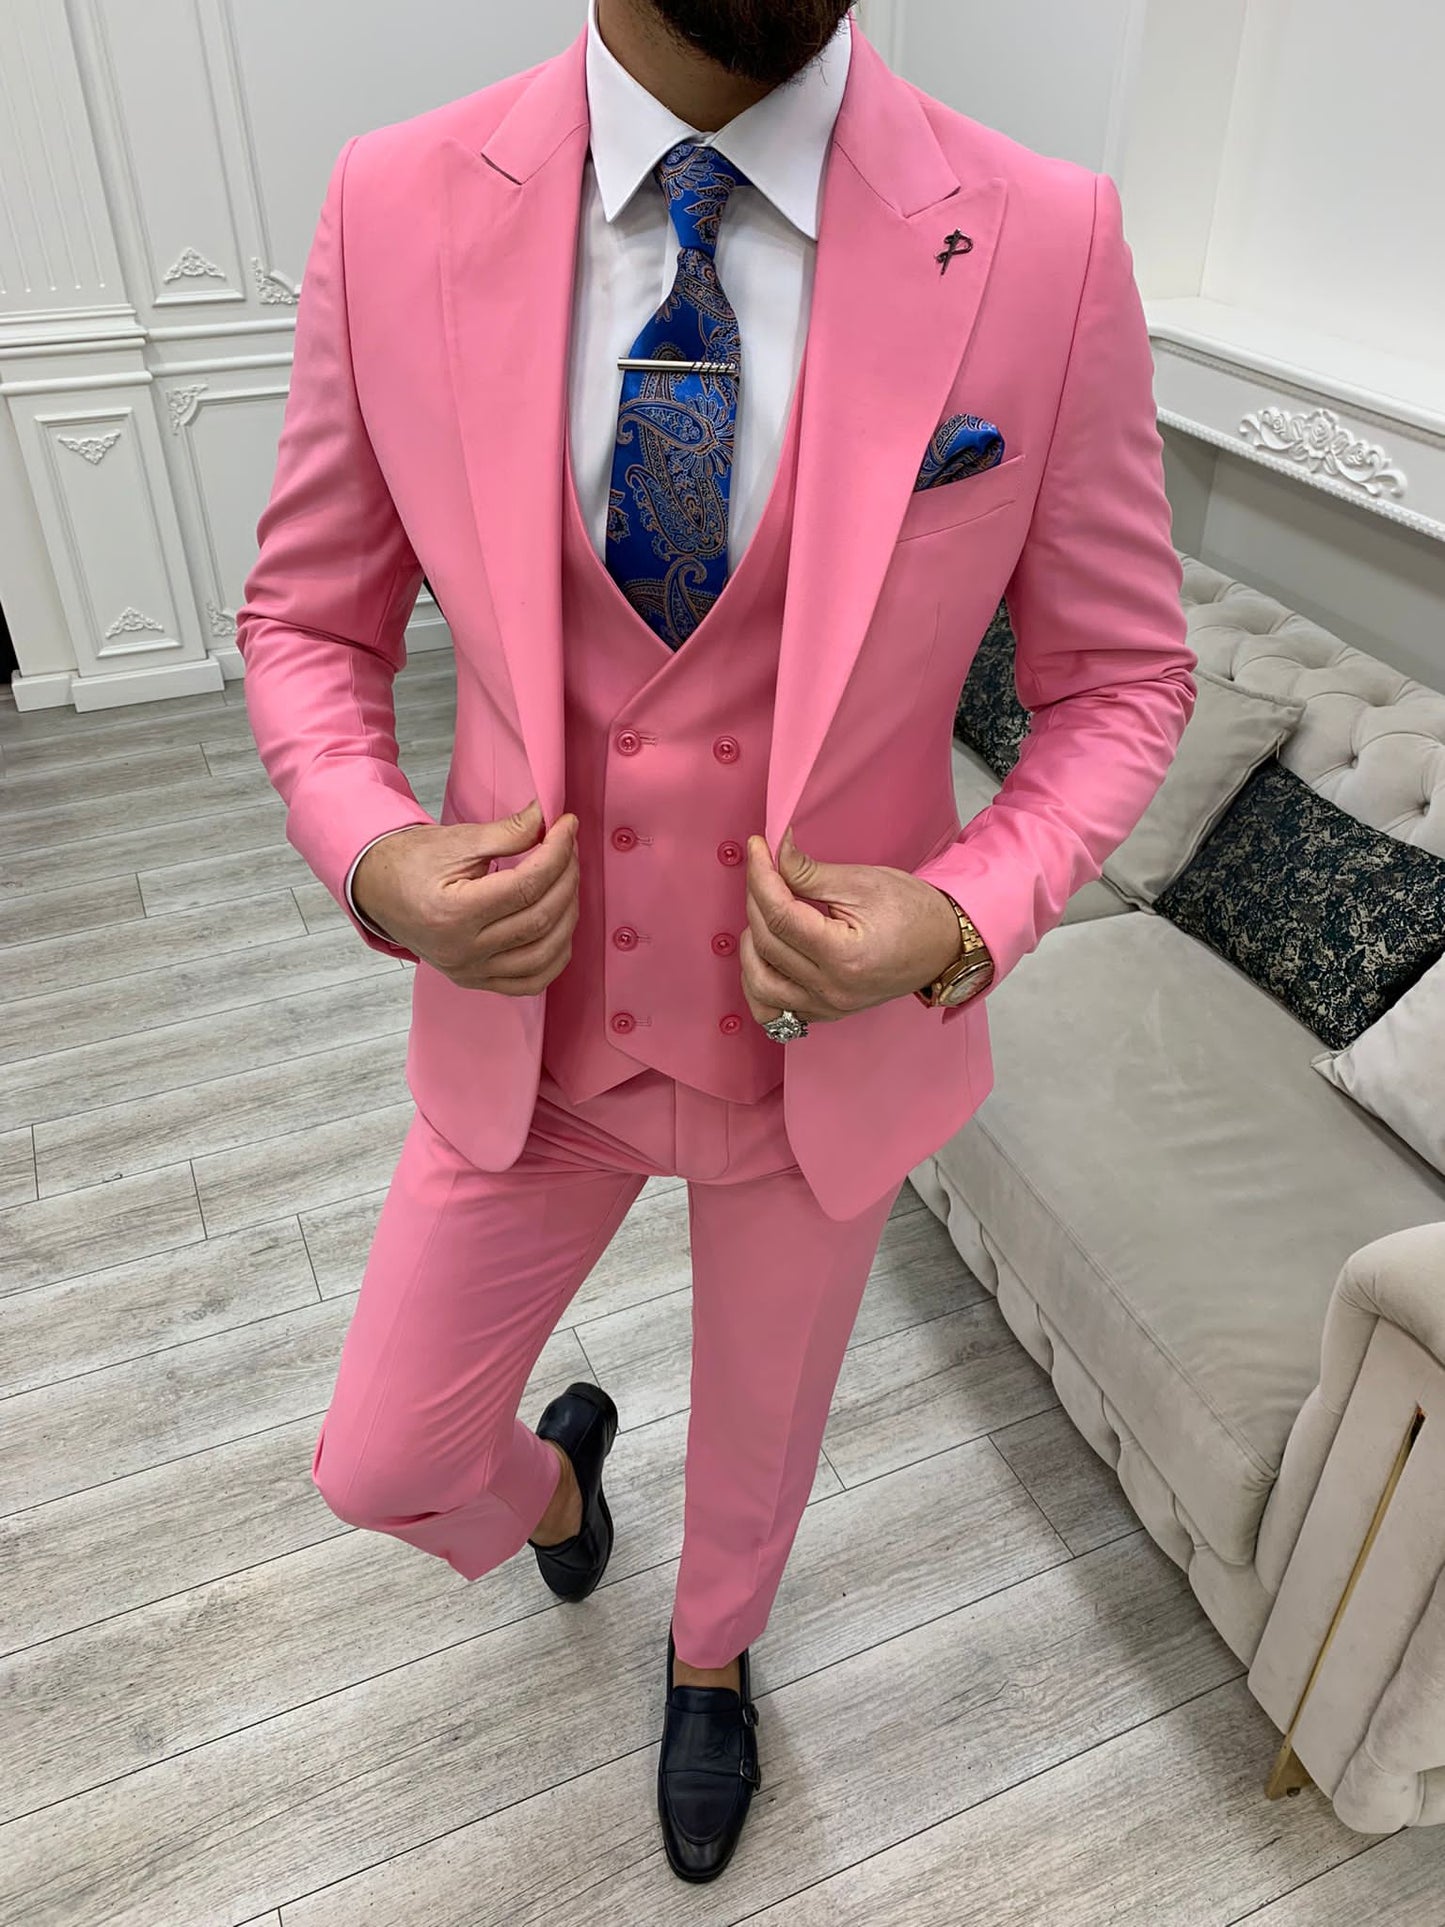 Realistic Slim Muscle Suit in Pink